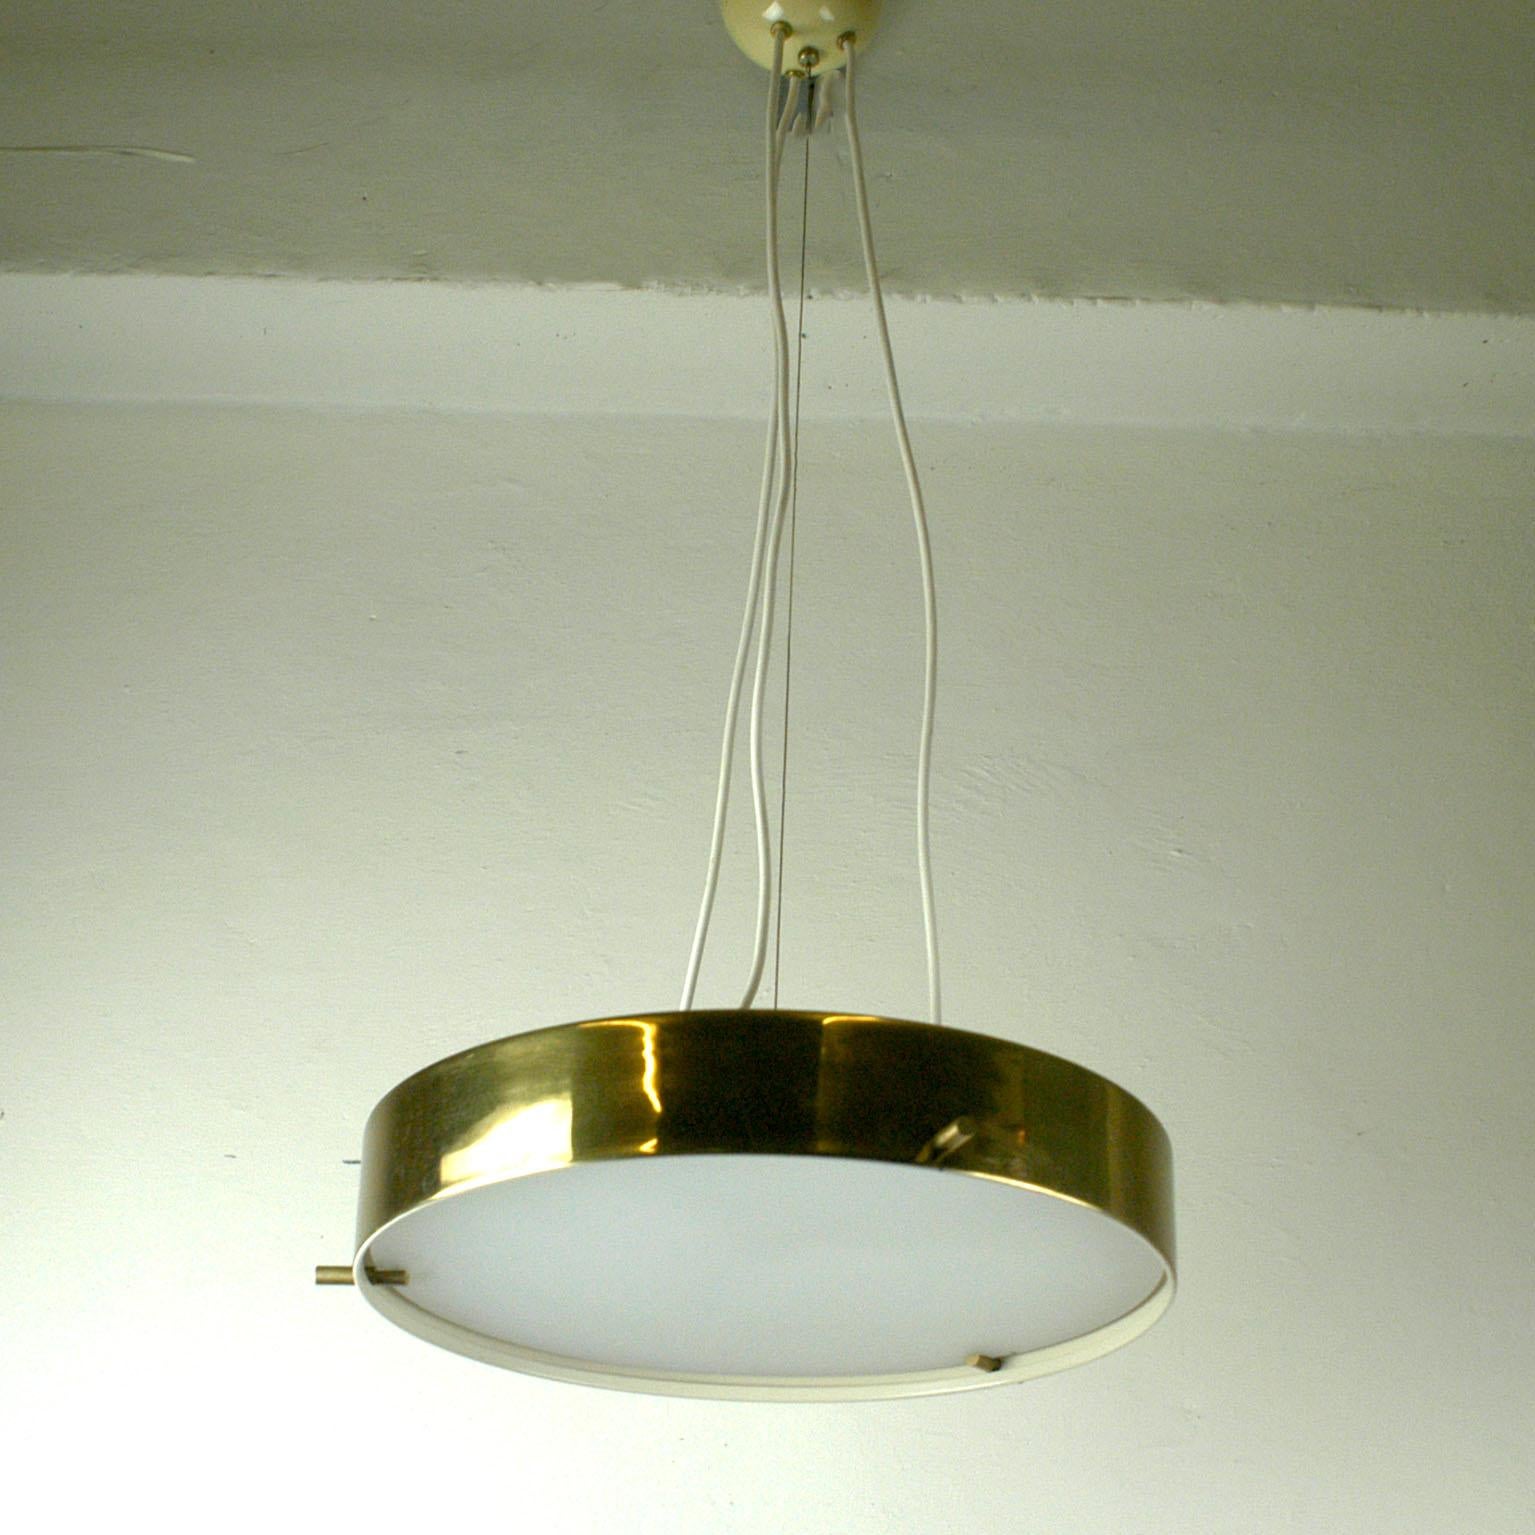 Wonderful Italian midcentury ceiling lamp designed by Bruno Gatta for Stilnovo in the 1950s The lamp features a brass frame with brass fittings holding the milk opaline glass diffuser shade with six E14 light sockets. it is suspended with three